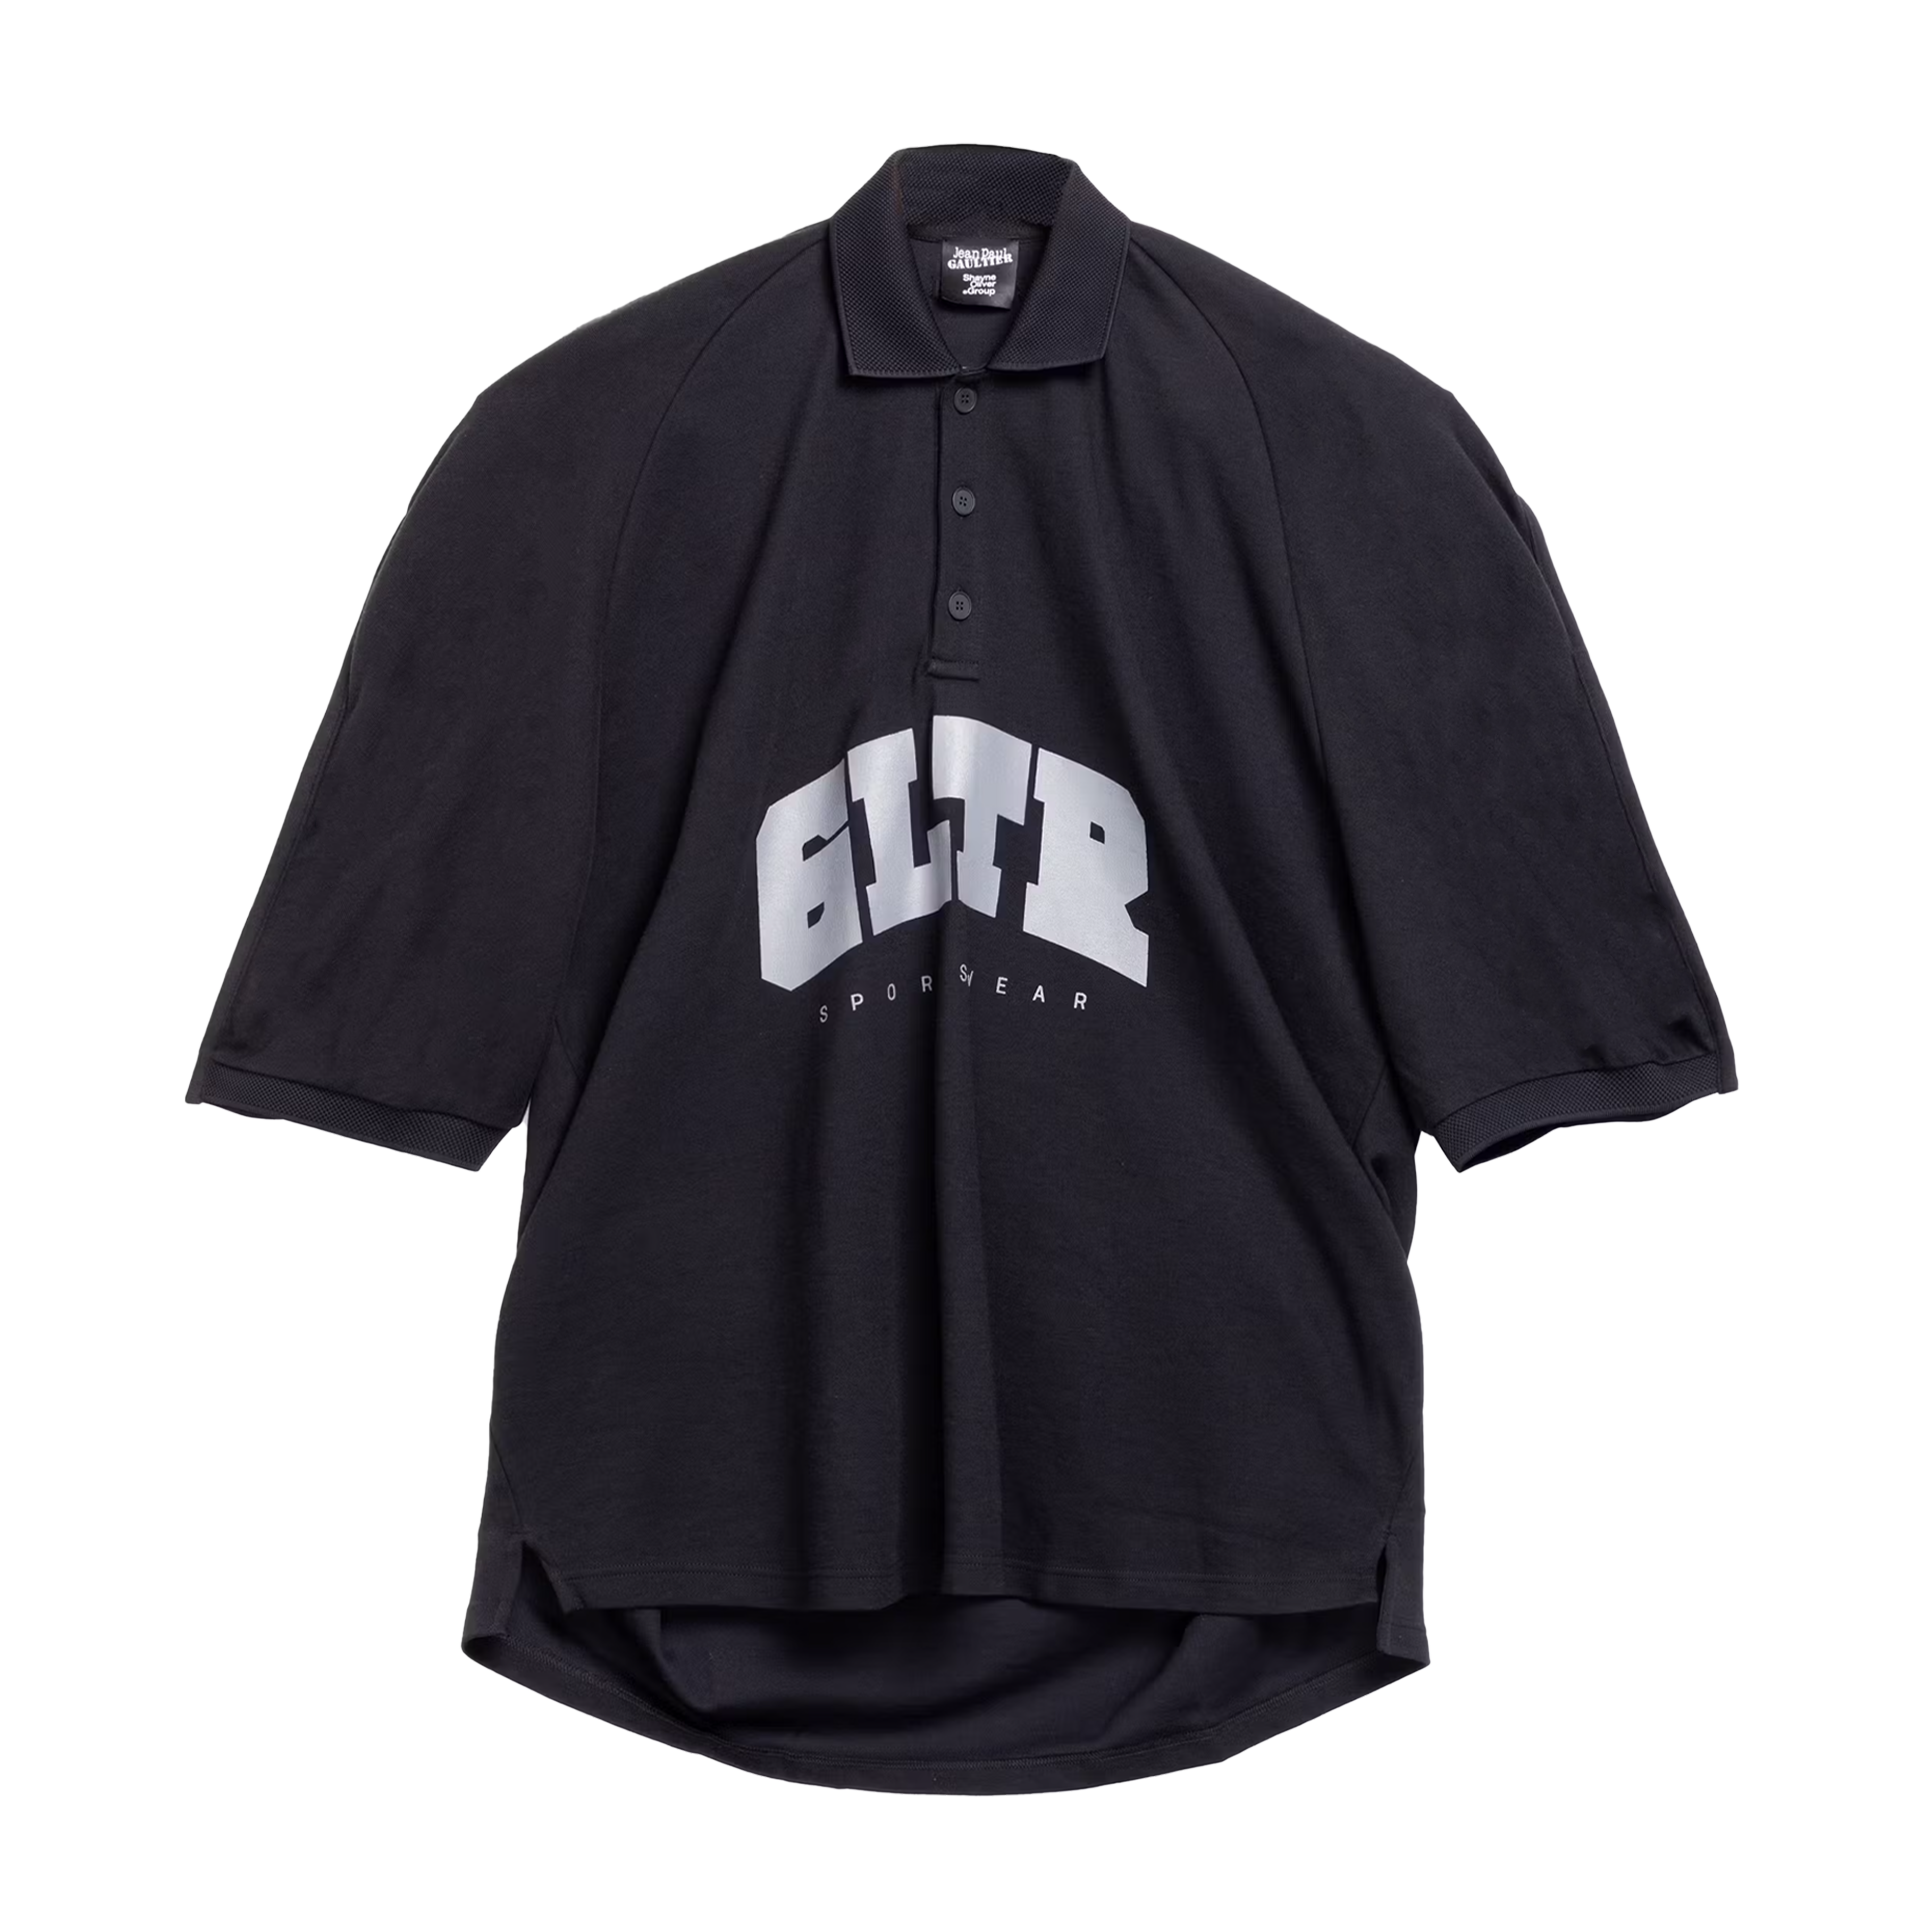 JPG X SHAYNE OLIVER JERSEY POLO WITH GRAPHIC PRINT BLACK